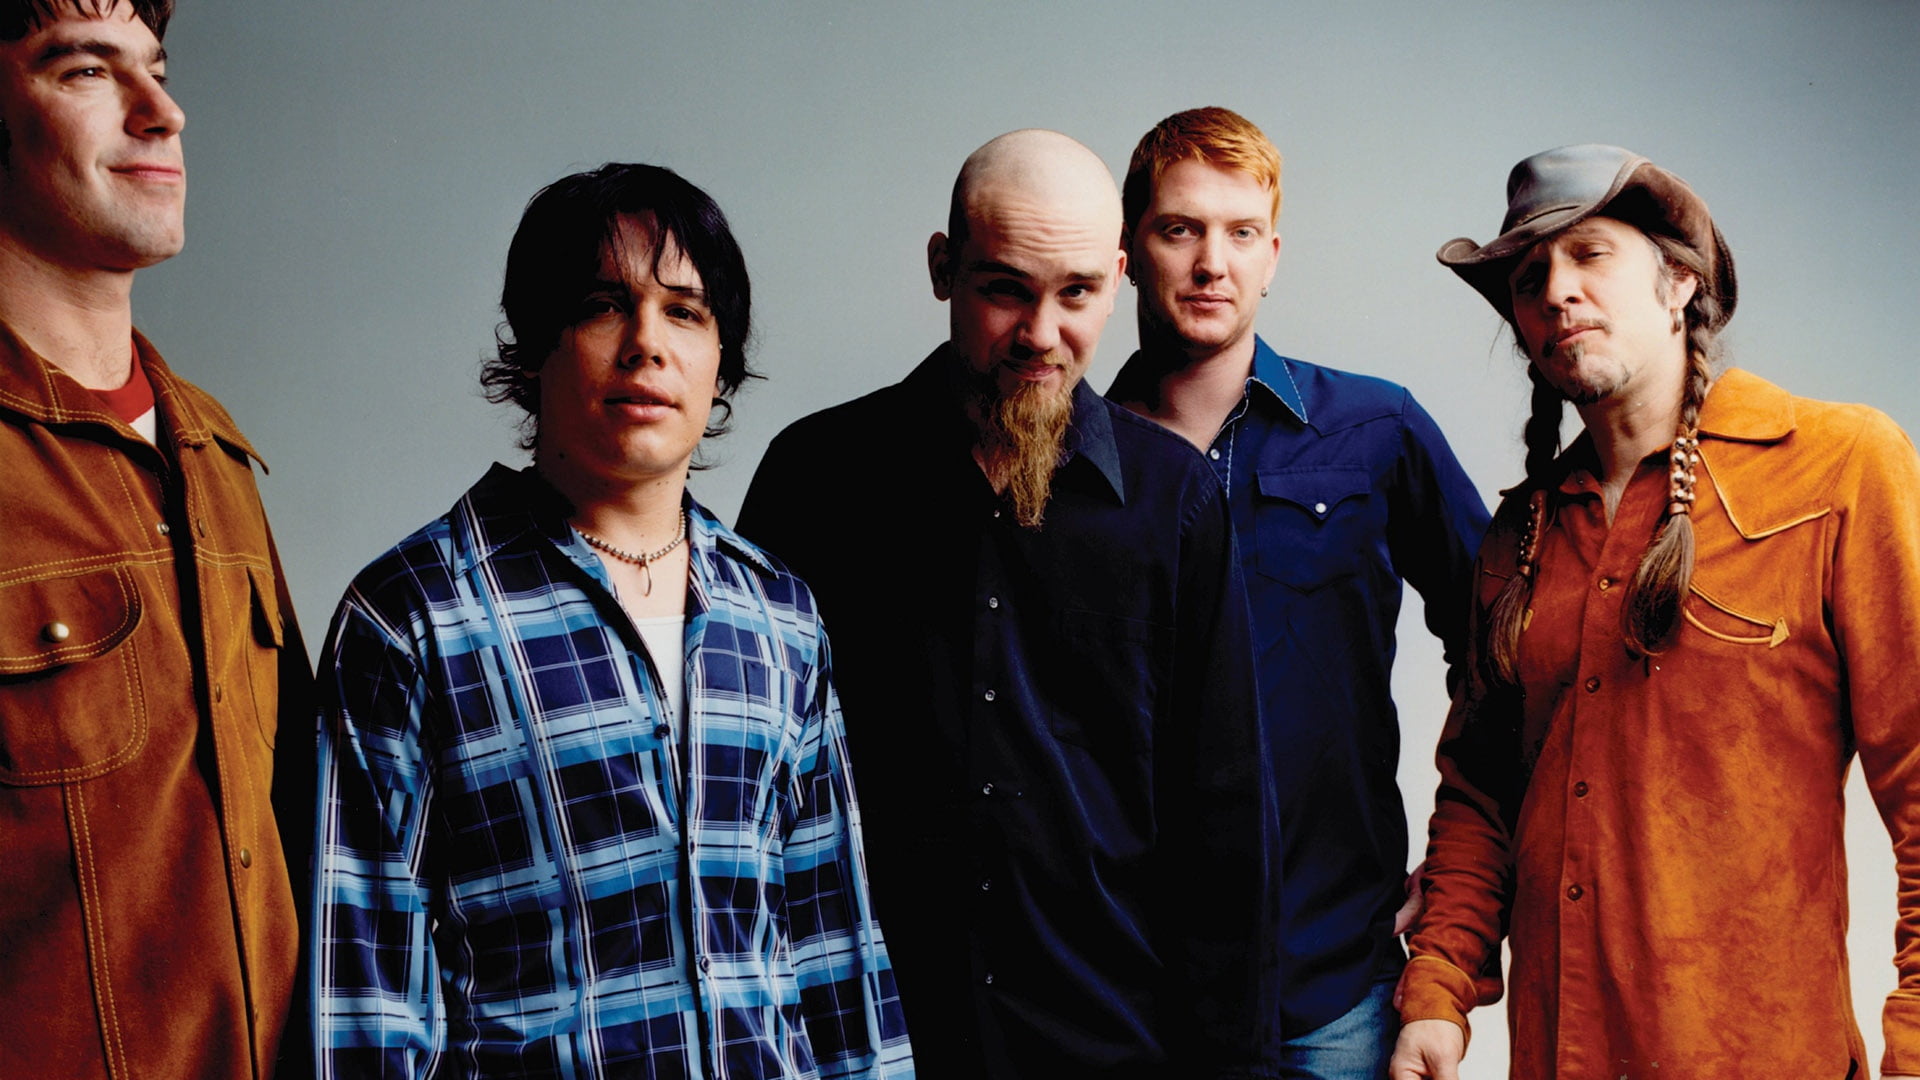 five man band, queens of the stone age, bald, beard, clothes